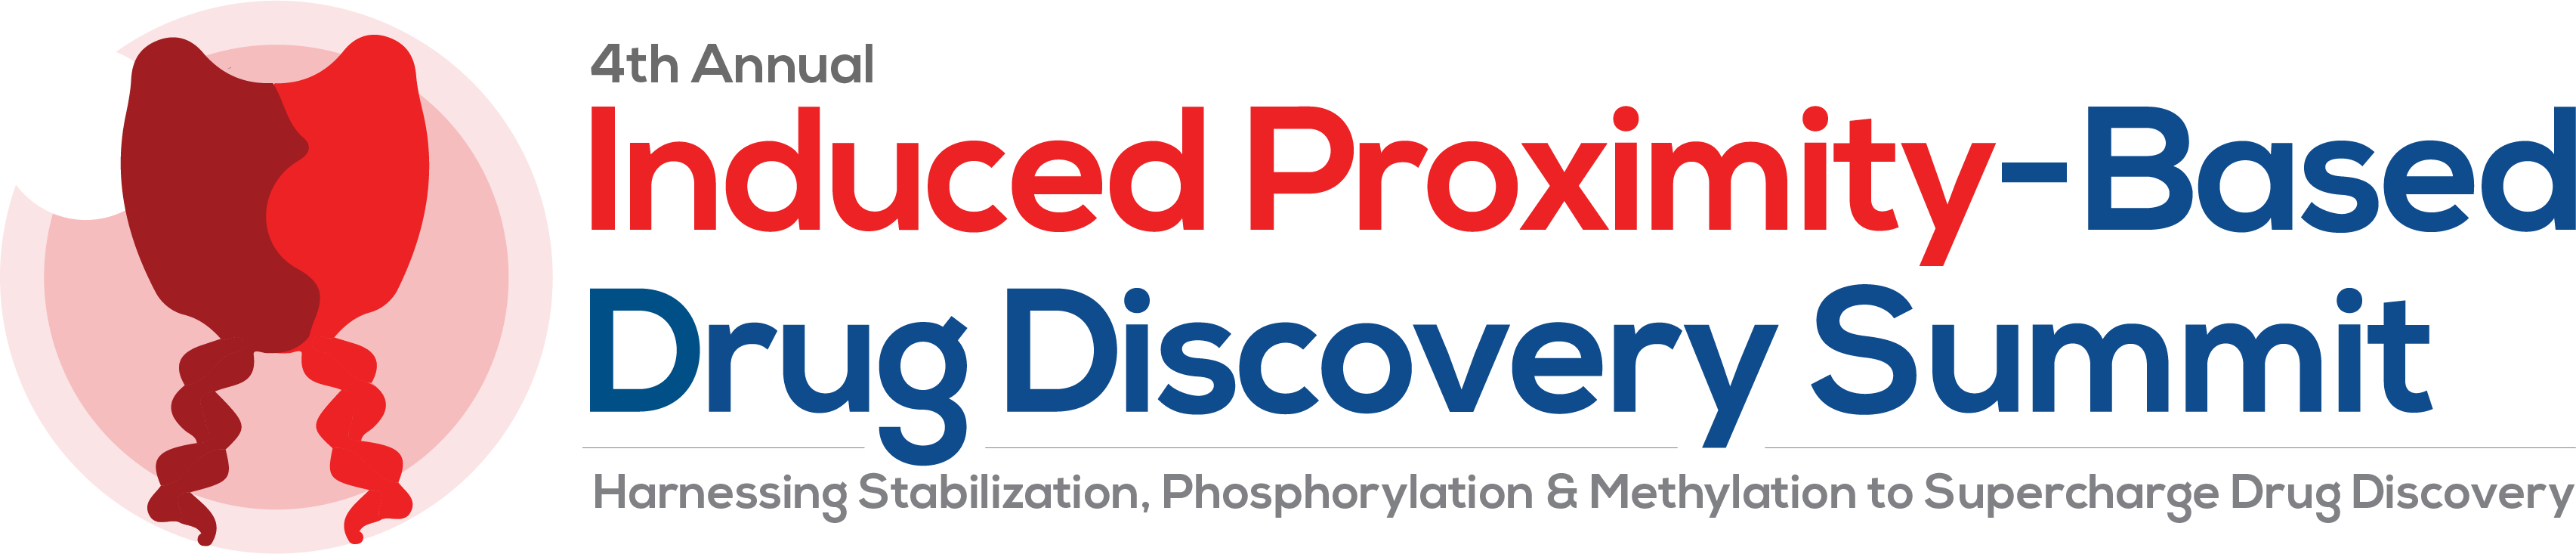 Induced Proximity-Based Drug Discovery Summit Strapline